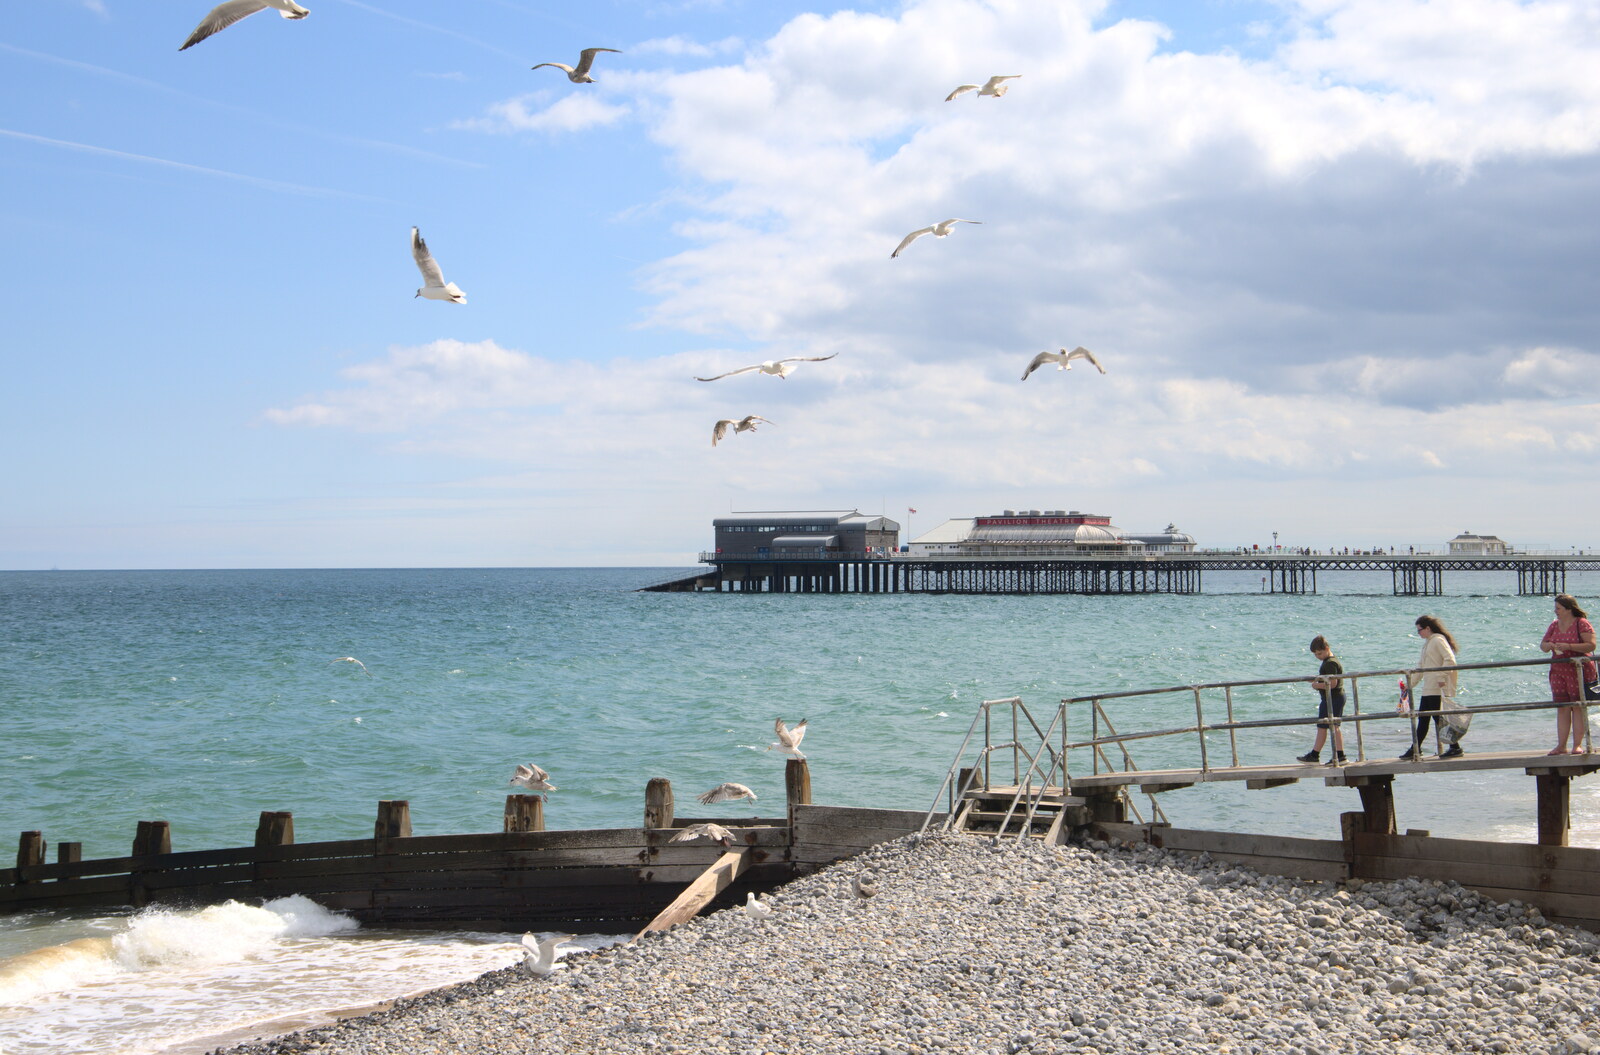 Seagulls whirl over Cromer pier from Camping on the Coast, East Runton, North Norfolk - 25th July 2020